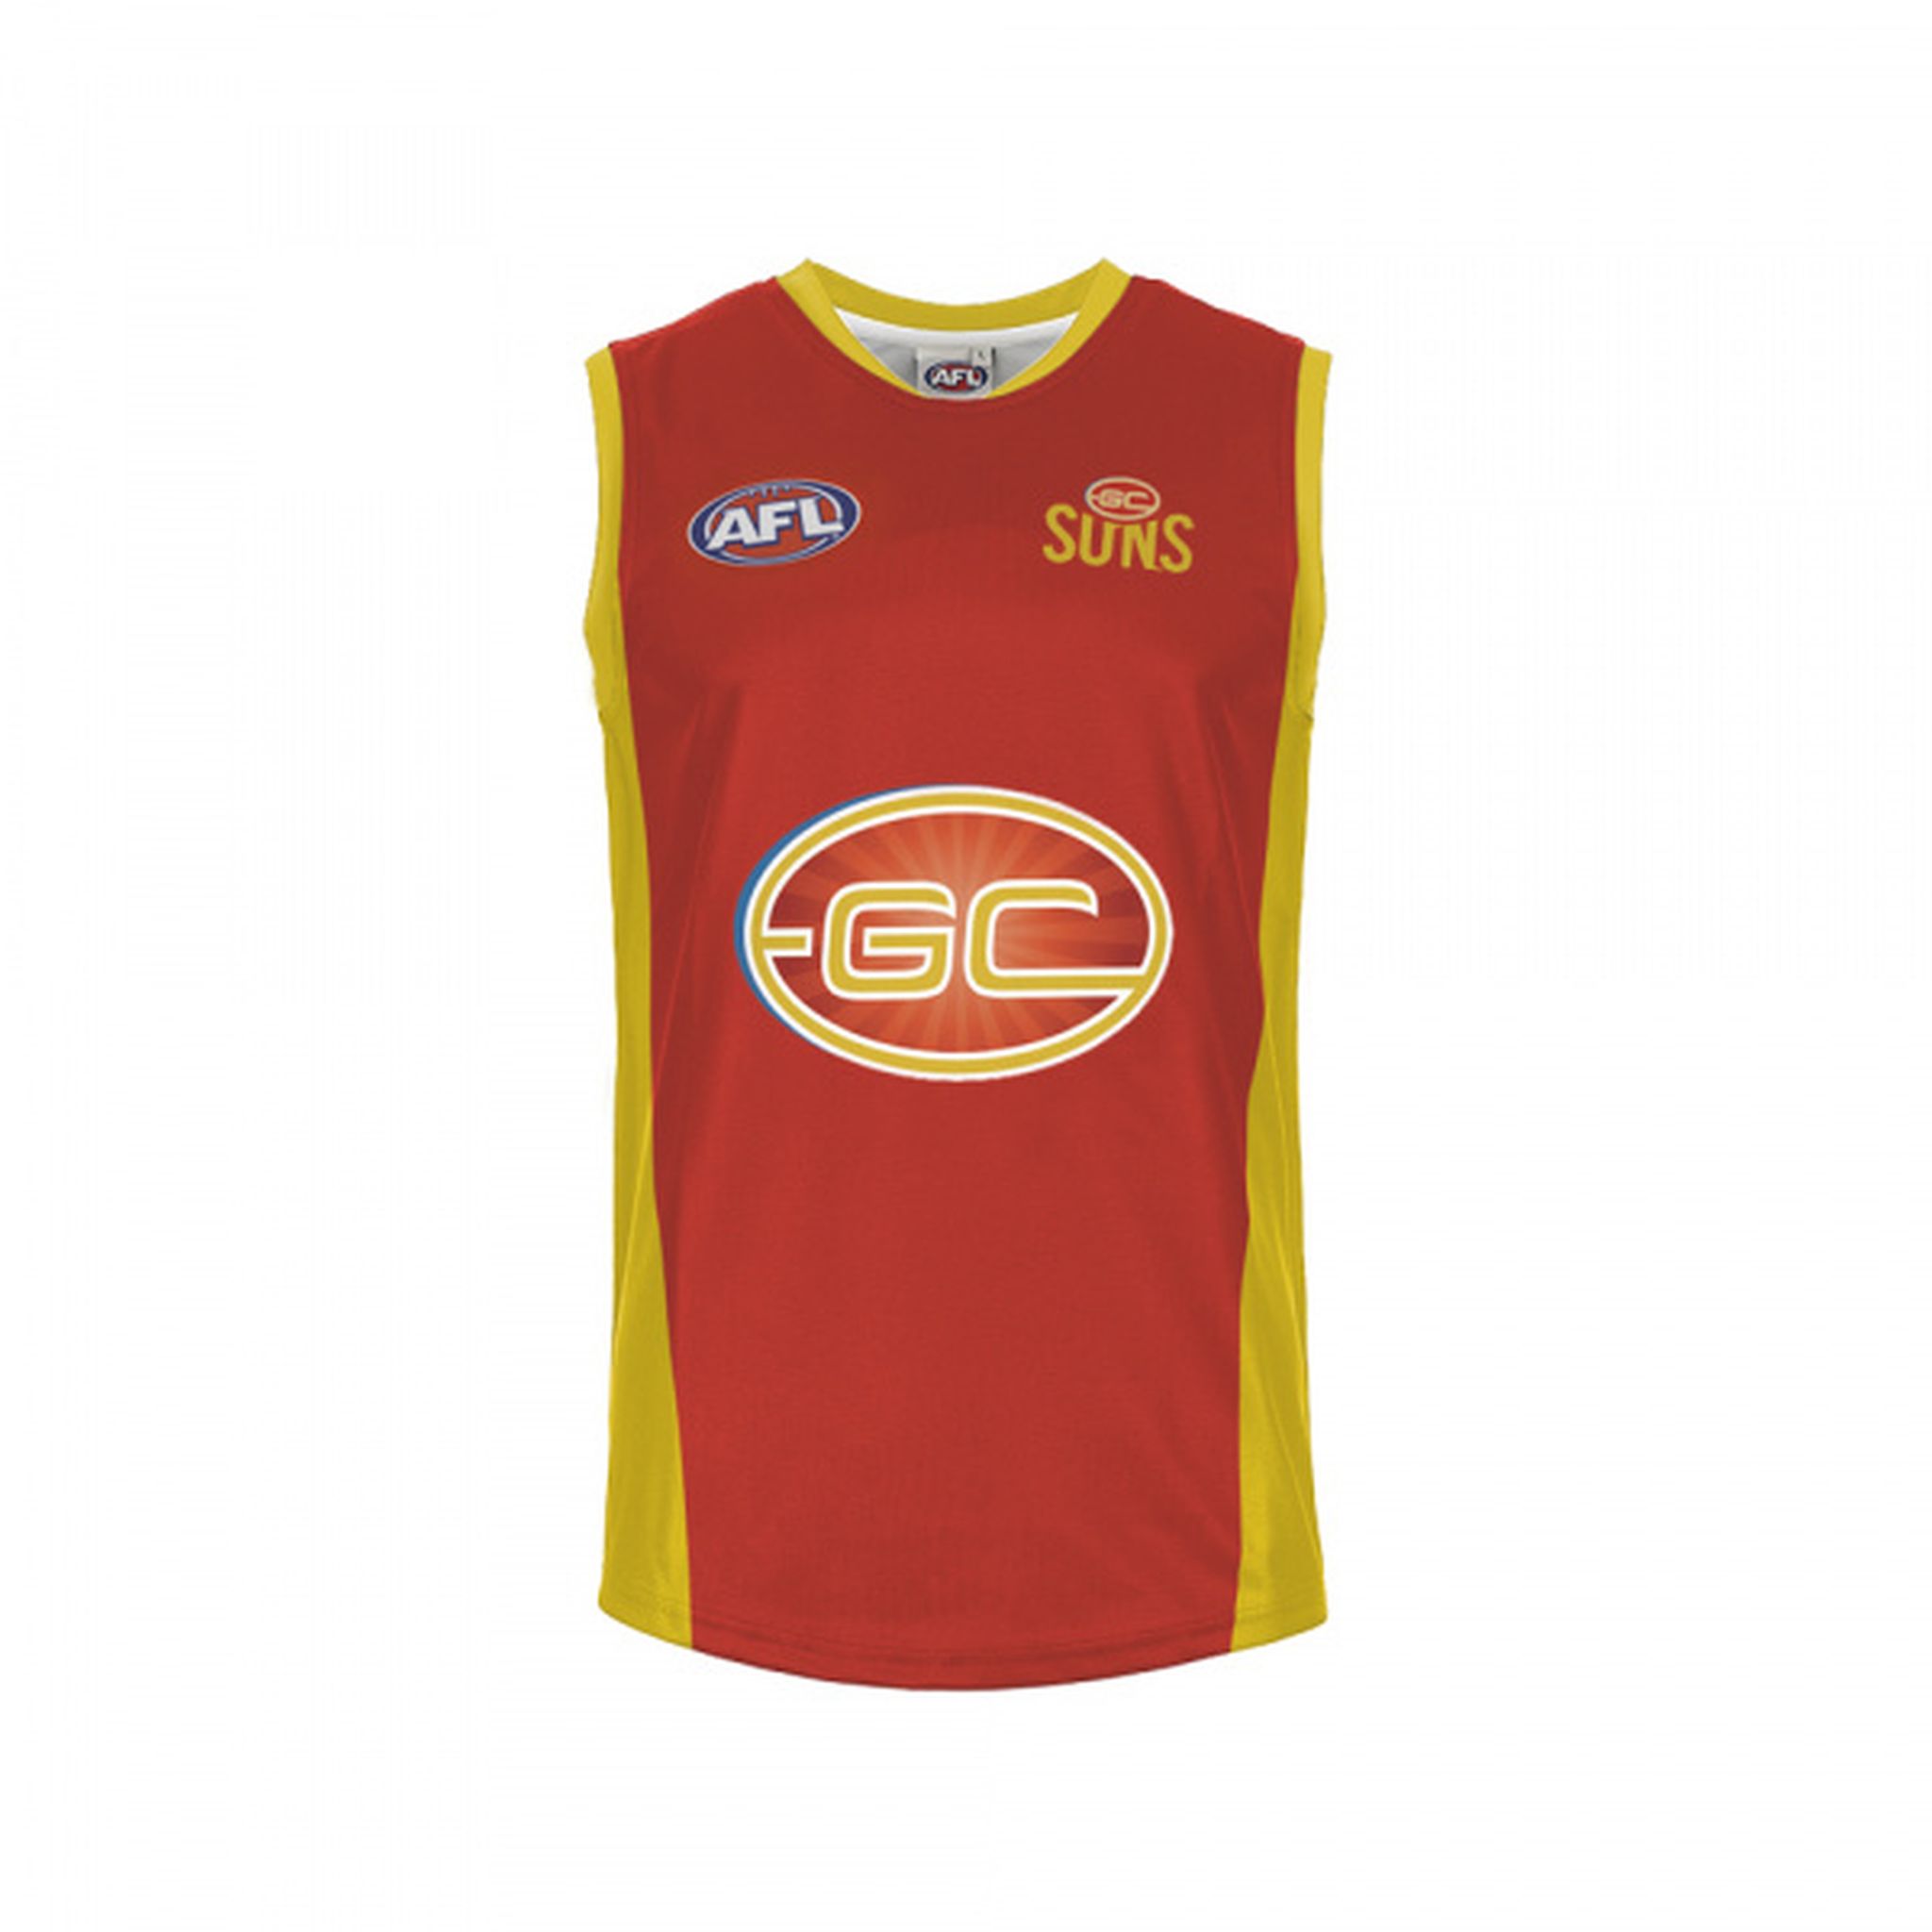 Burley Gold Coast Suns AFL Home Adults Replica Guernsey